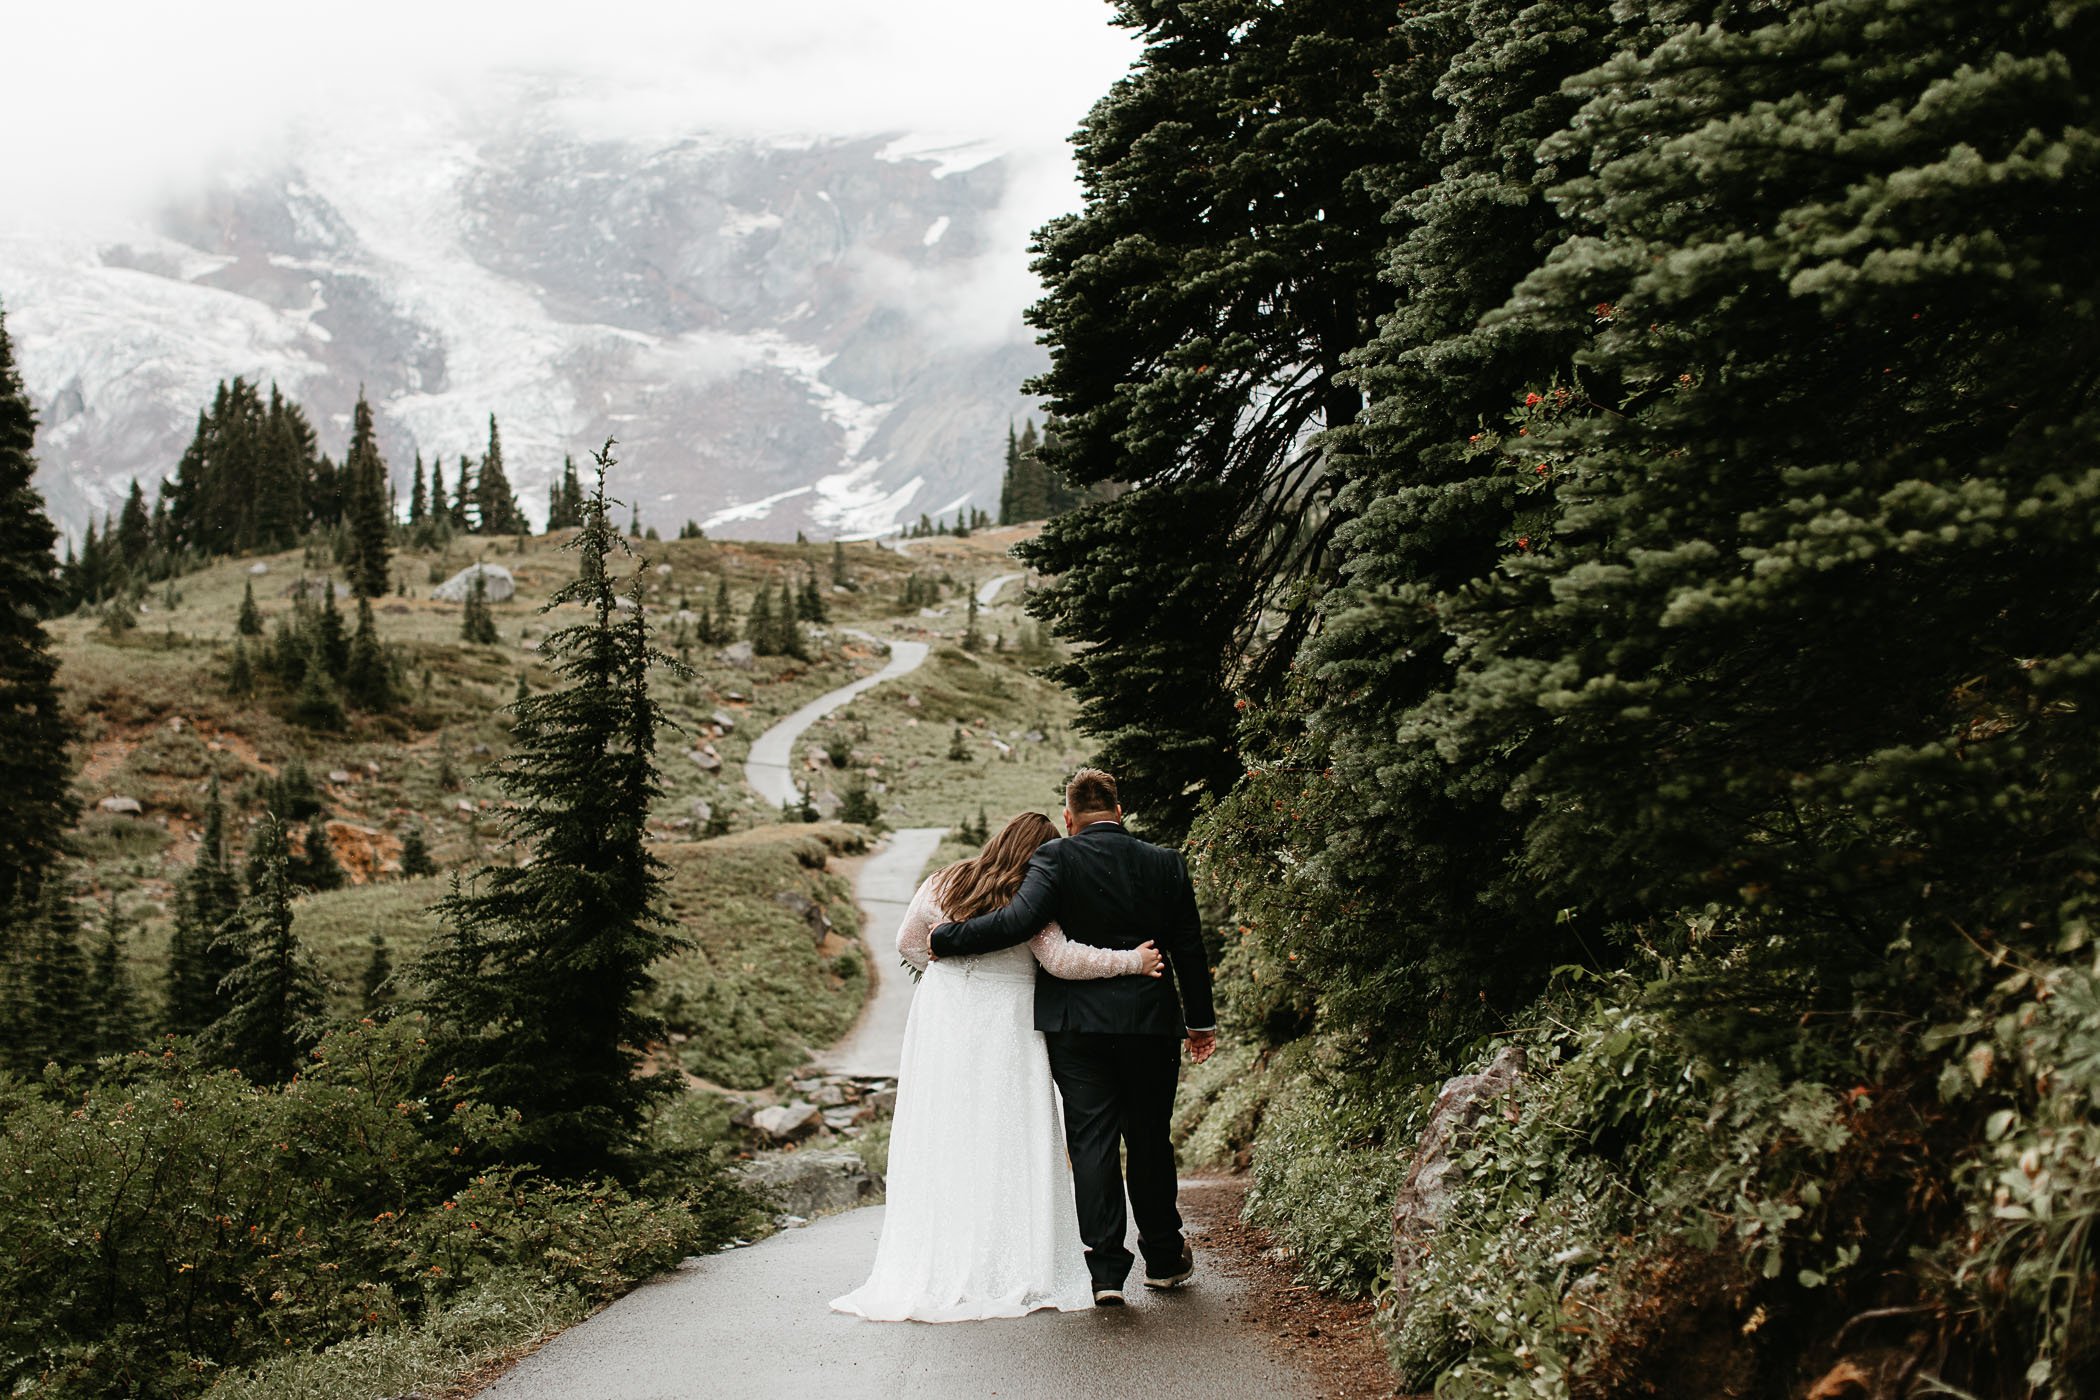  A couple walk down a wooded path in a wedding dress and suit on a rainy day in Mt. Rainier National Park. 